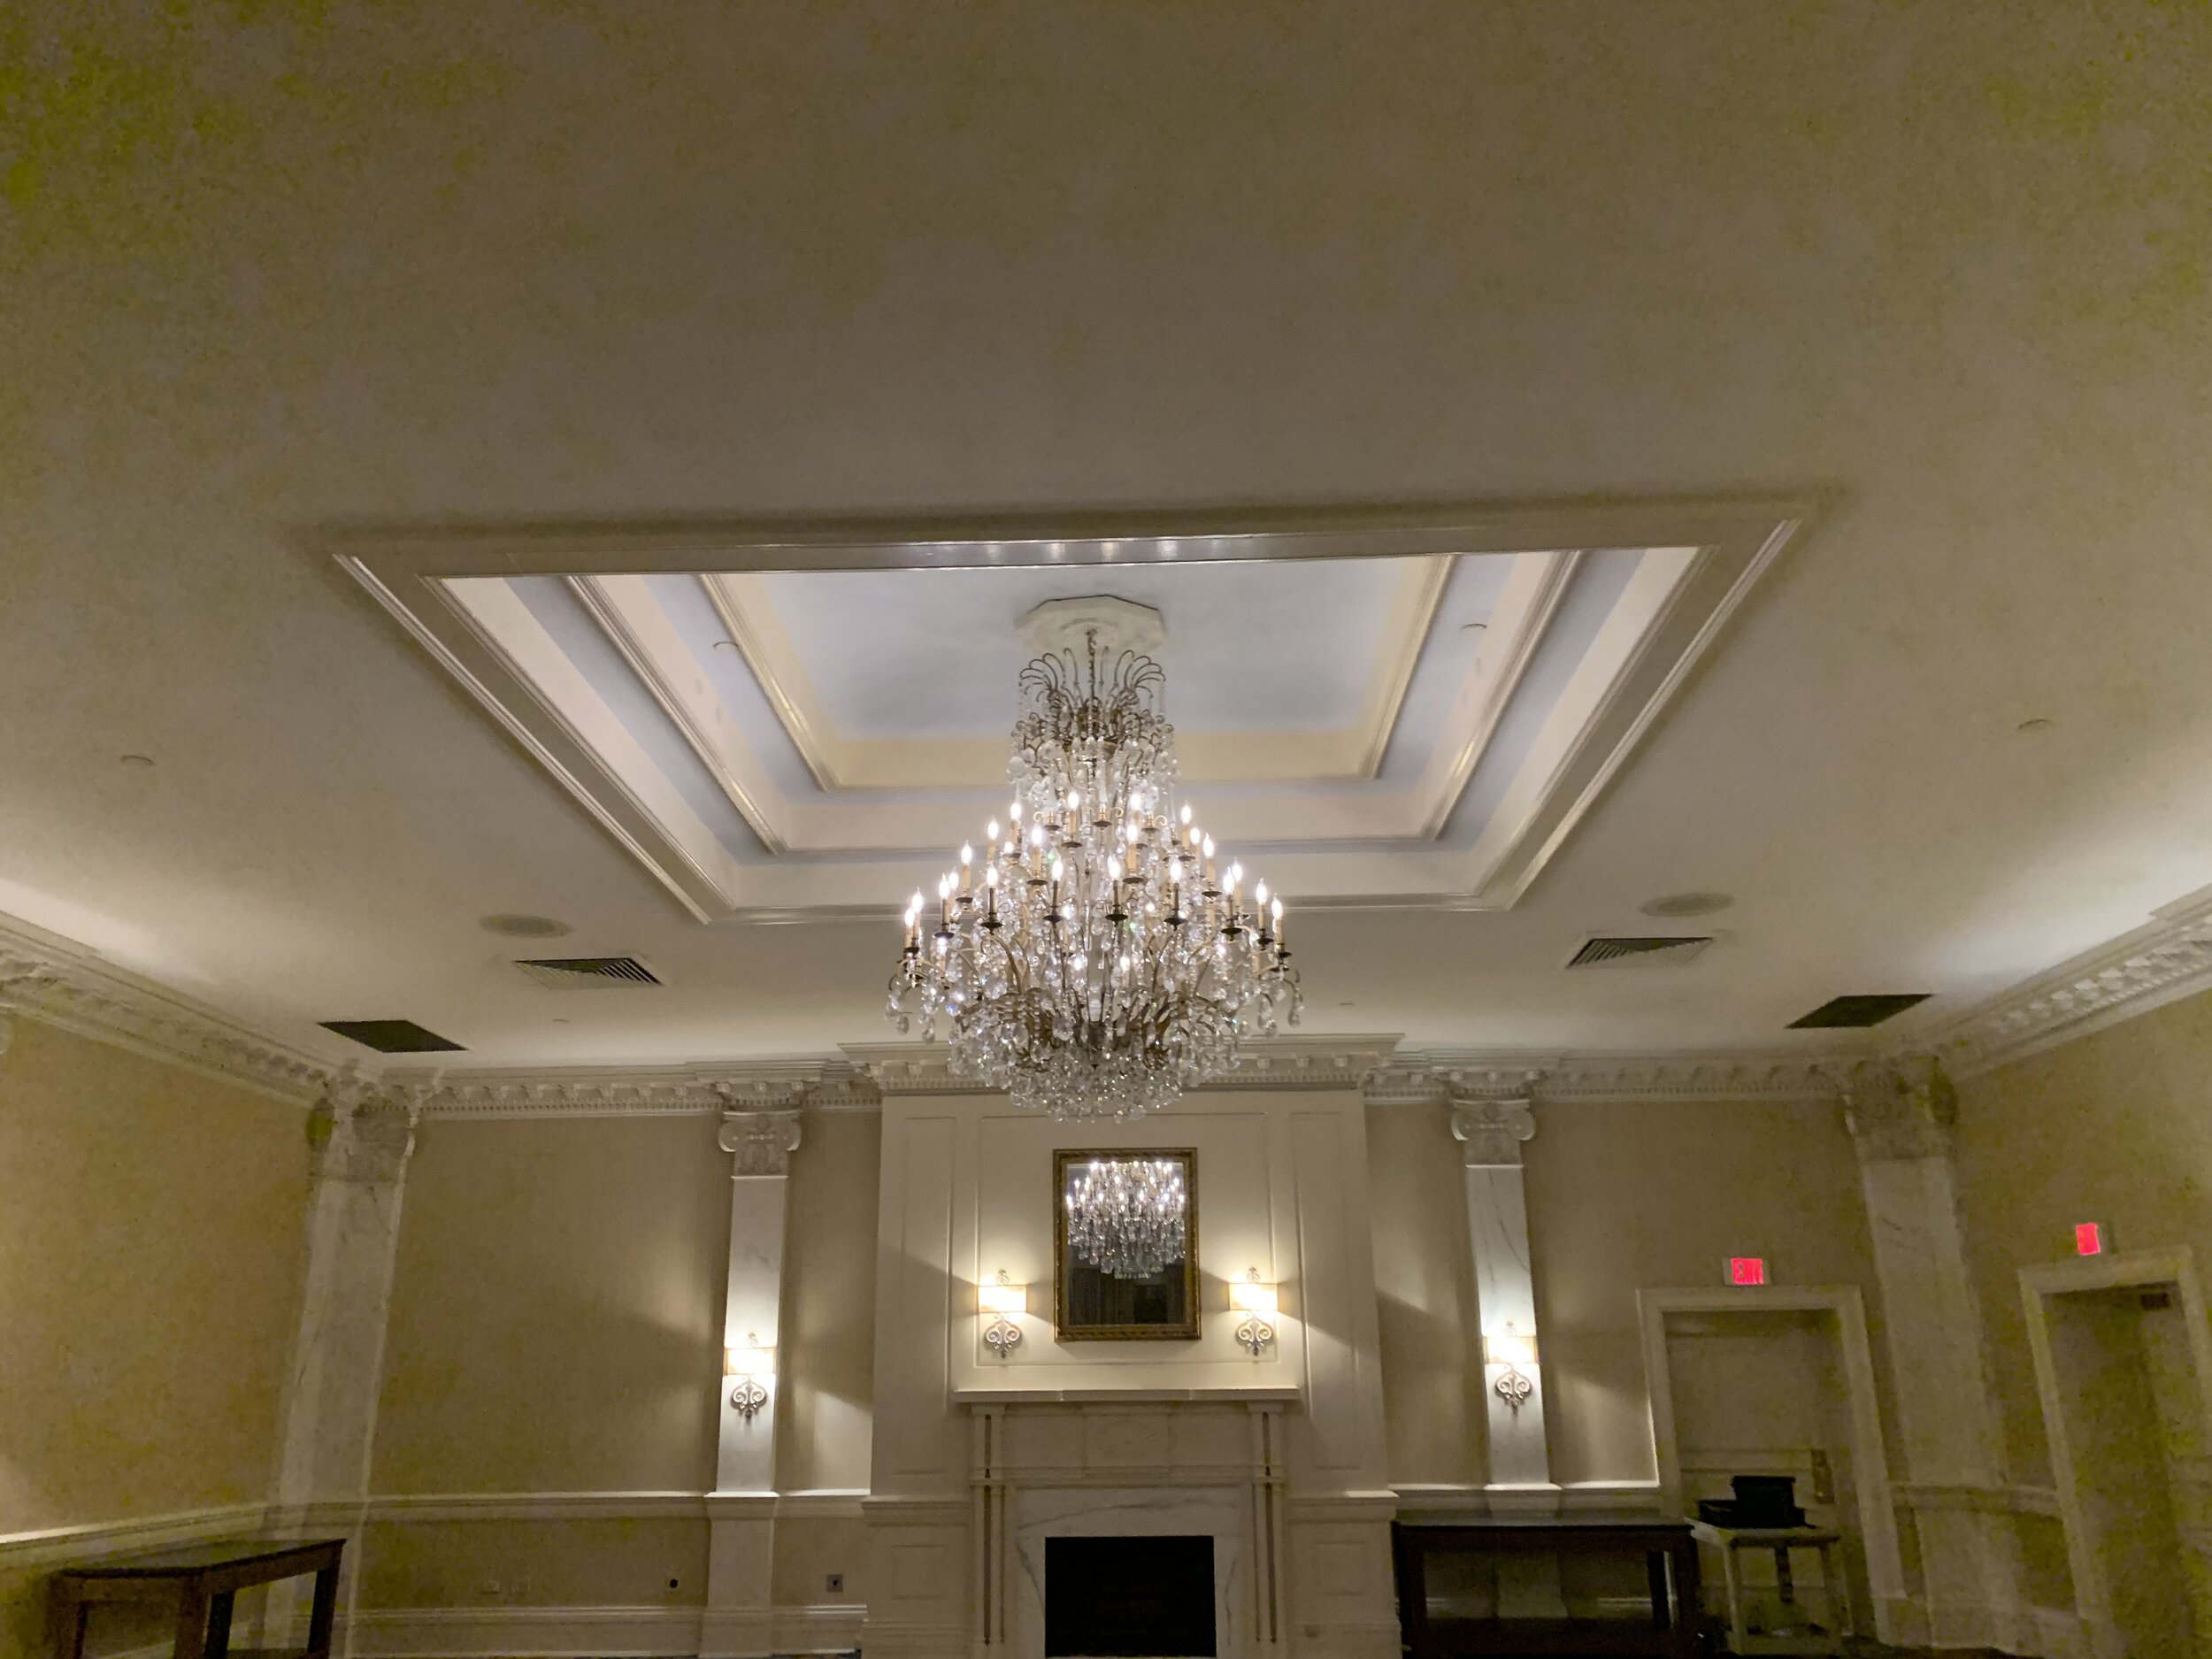 Fireplace in the Ballroom